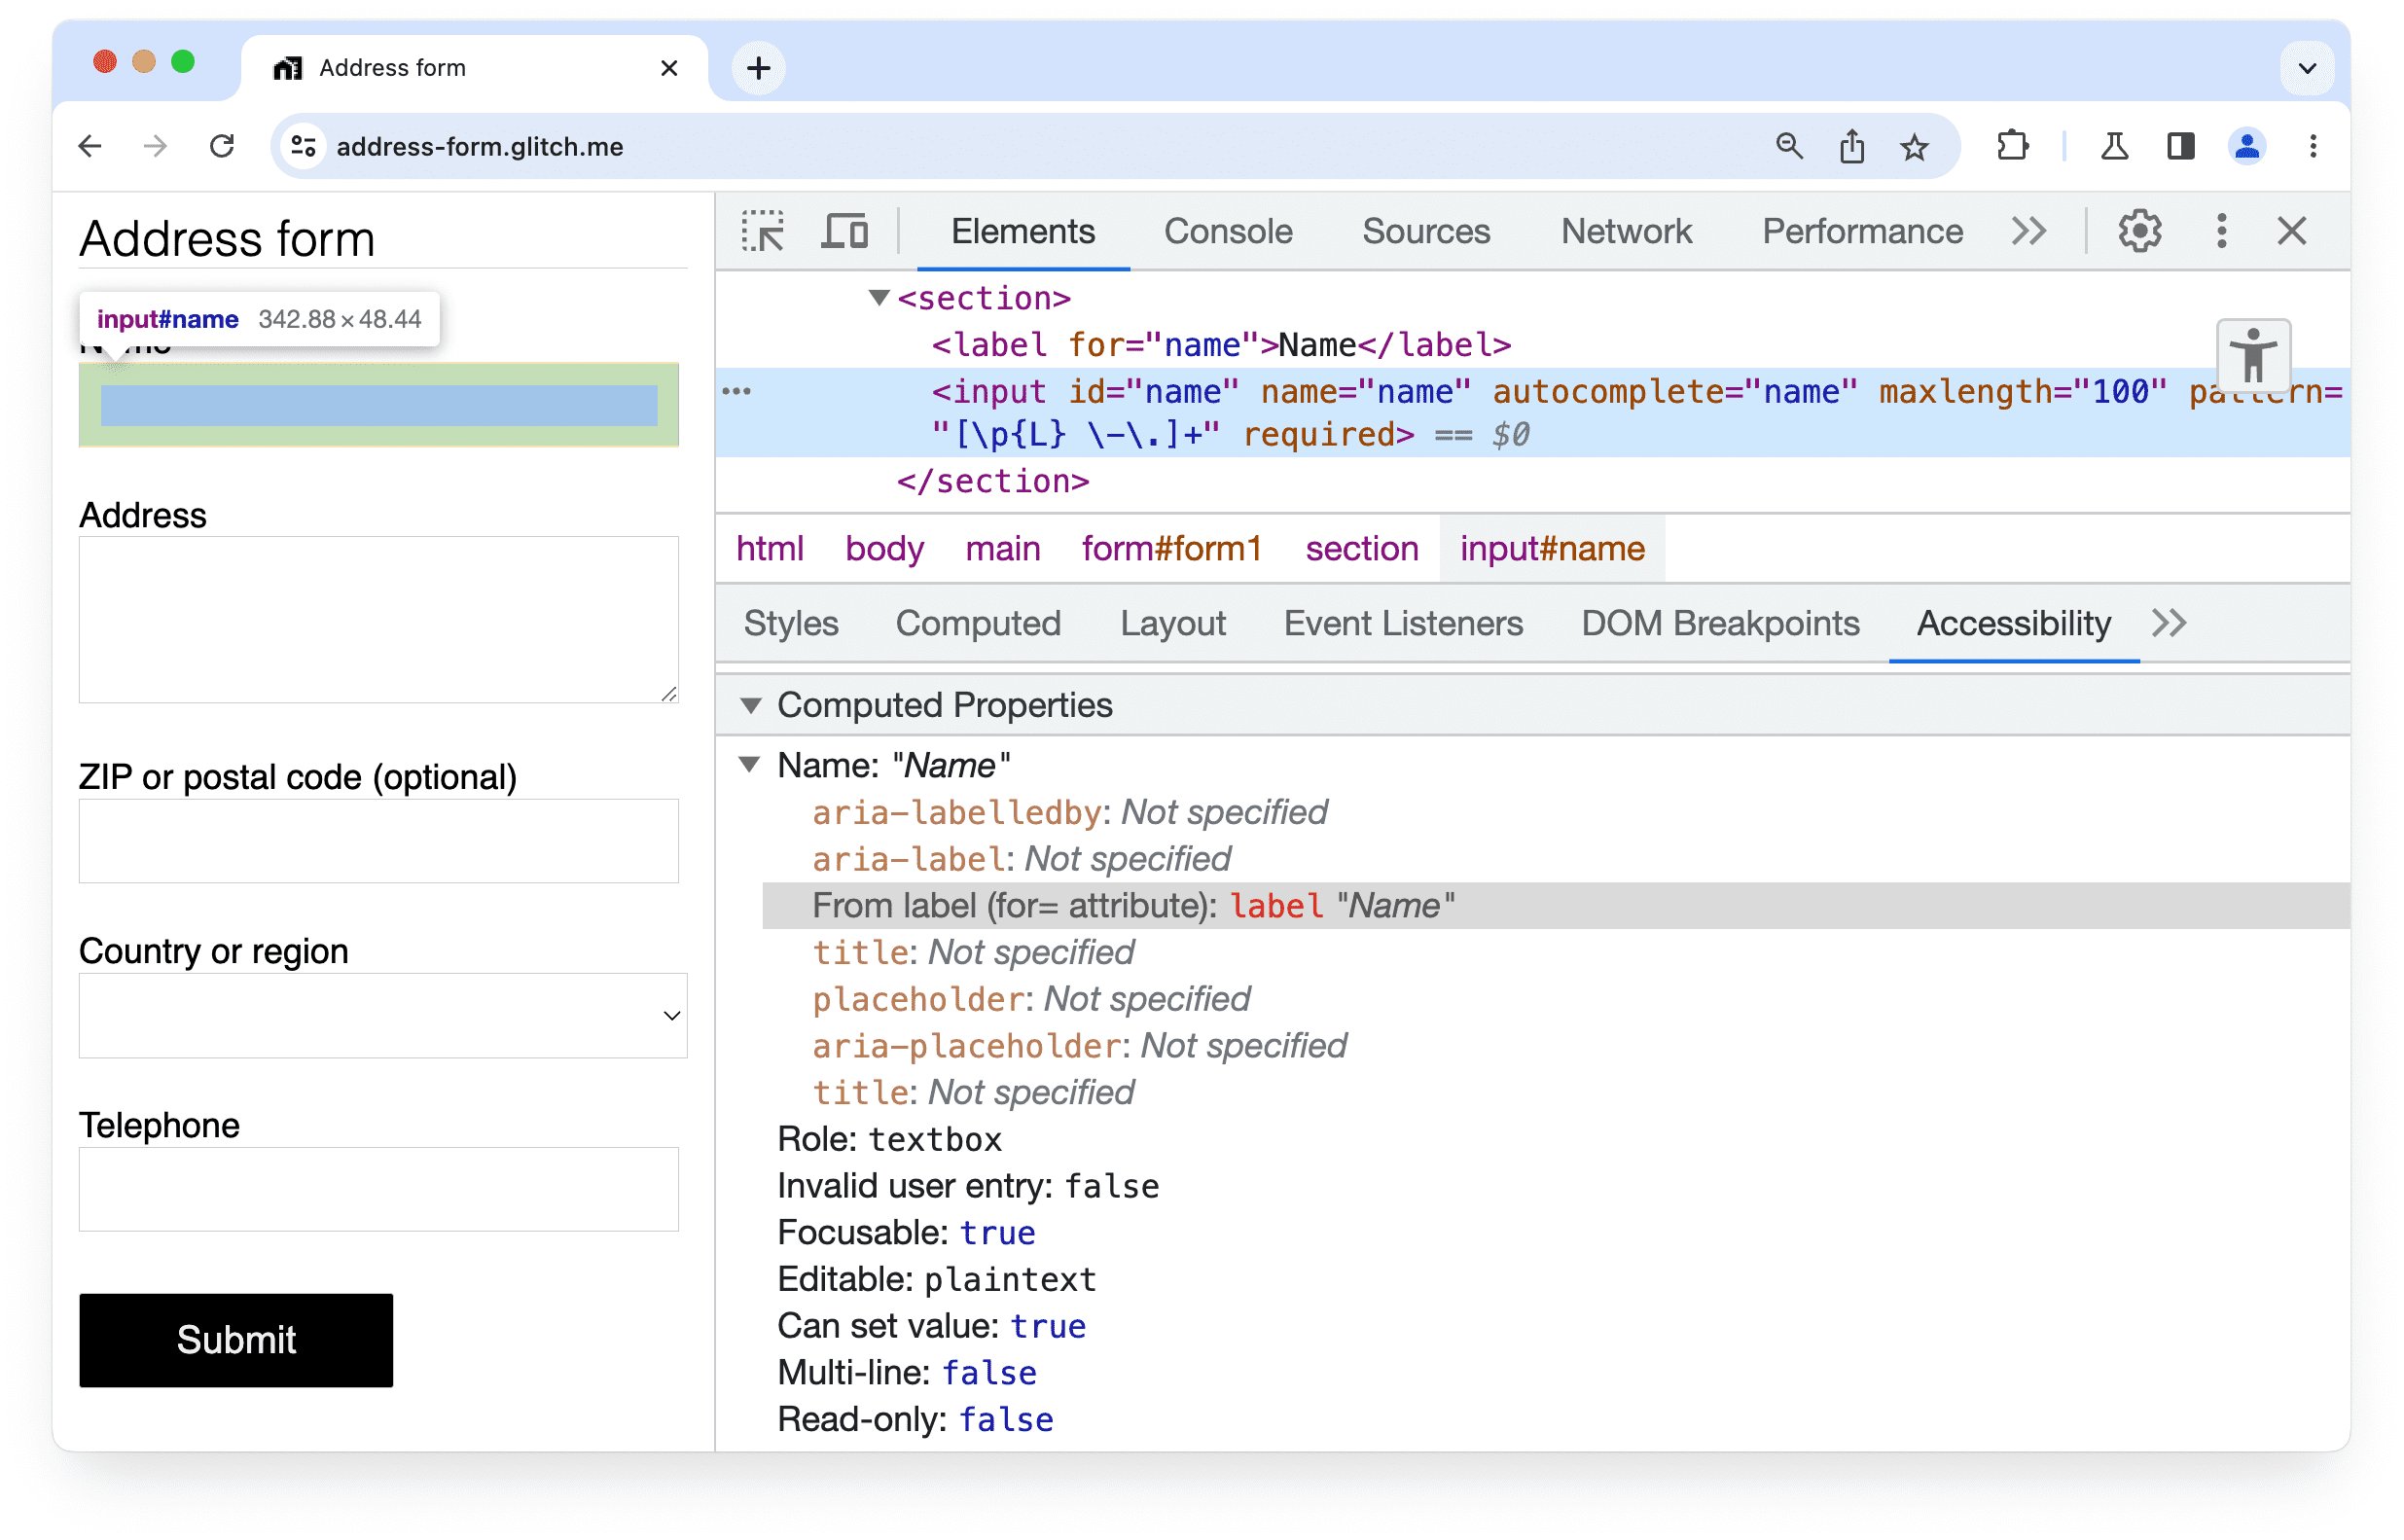 Chrome DevTools
Accessibility panel, showing that a label was found for an input element in a form.